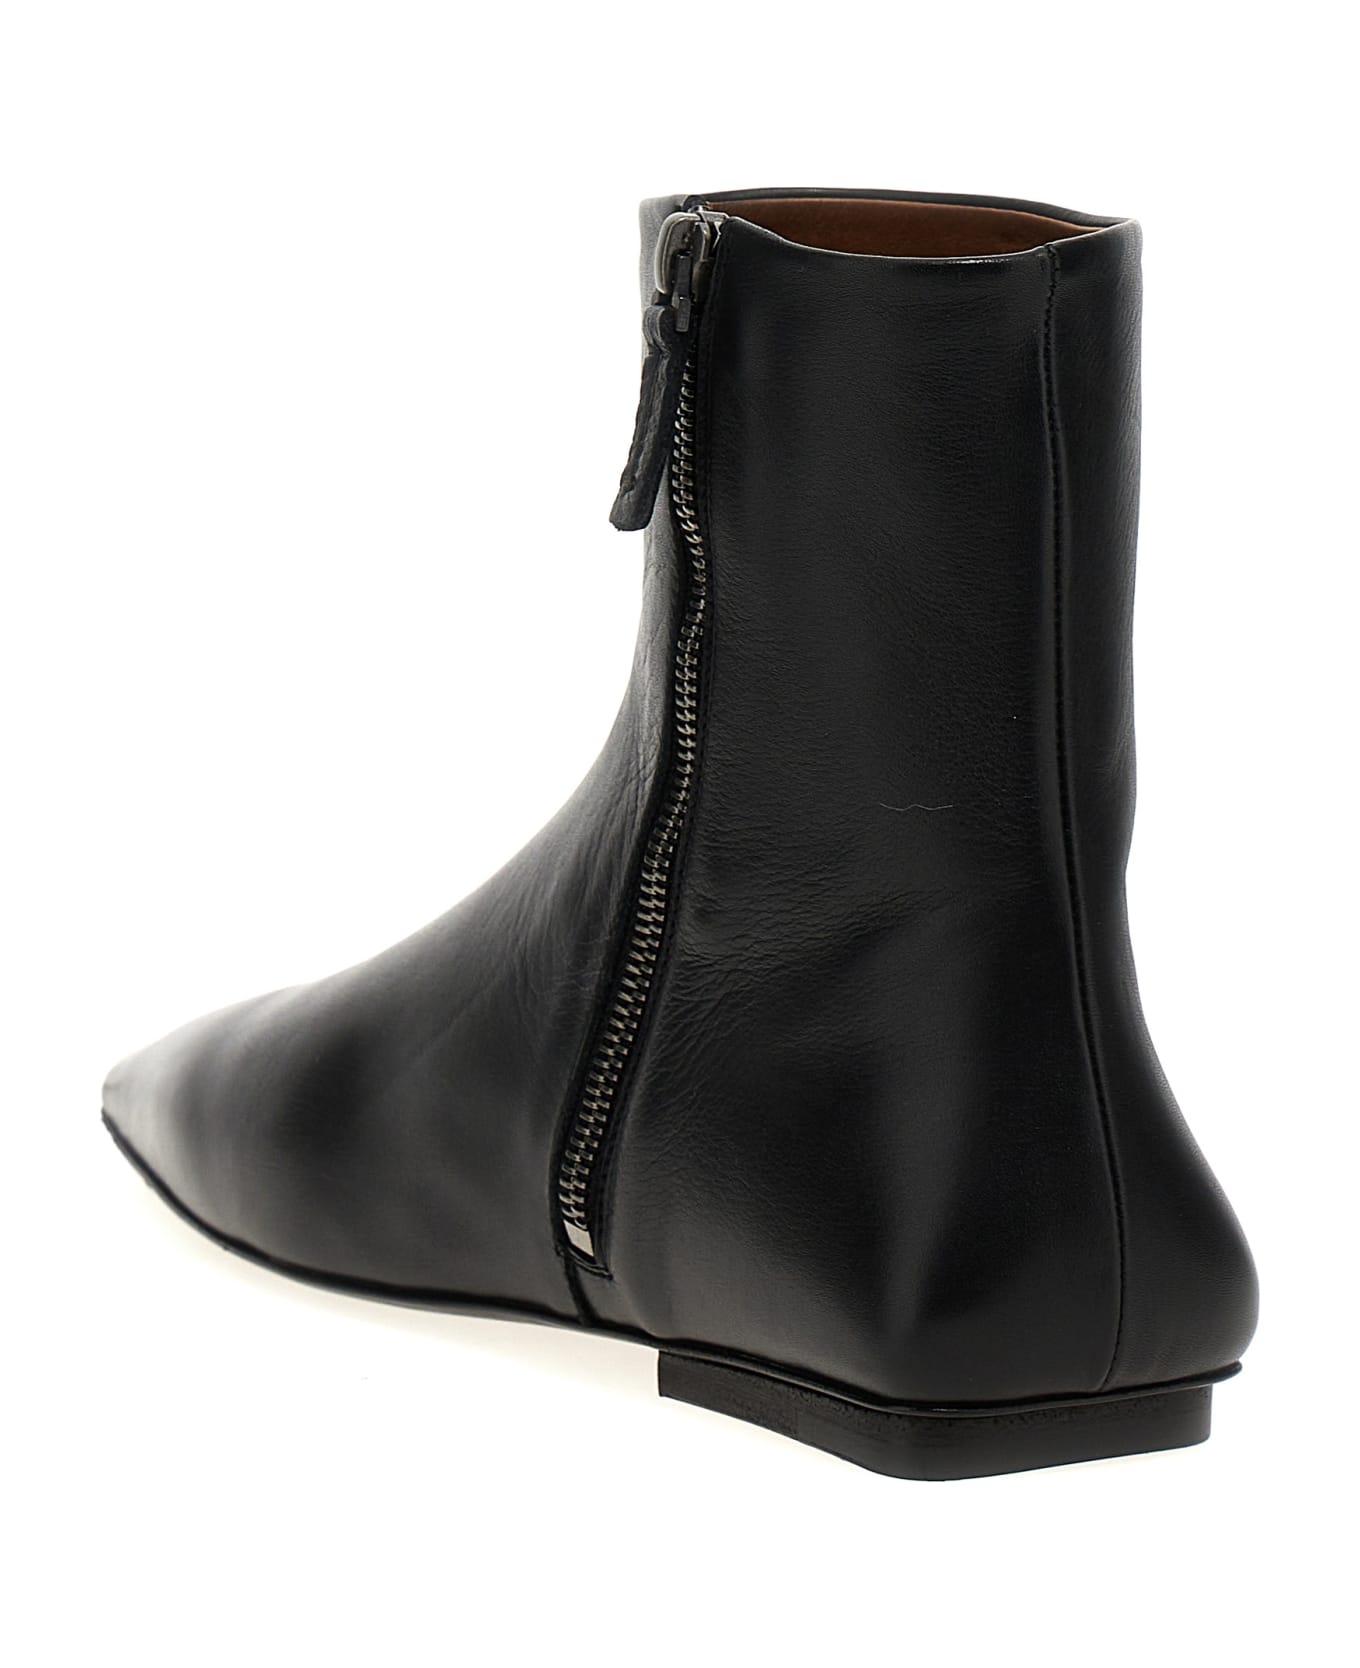 Marsell 'ago' Ankle Boots - Black   ブーツ